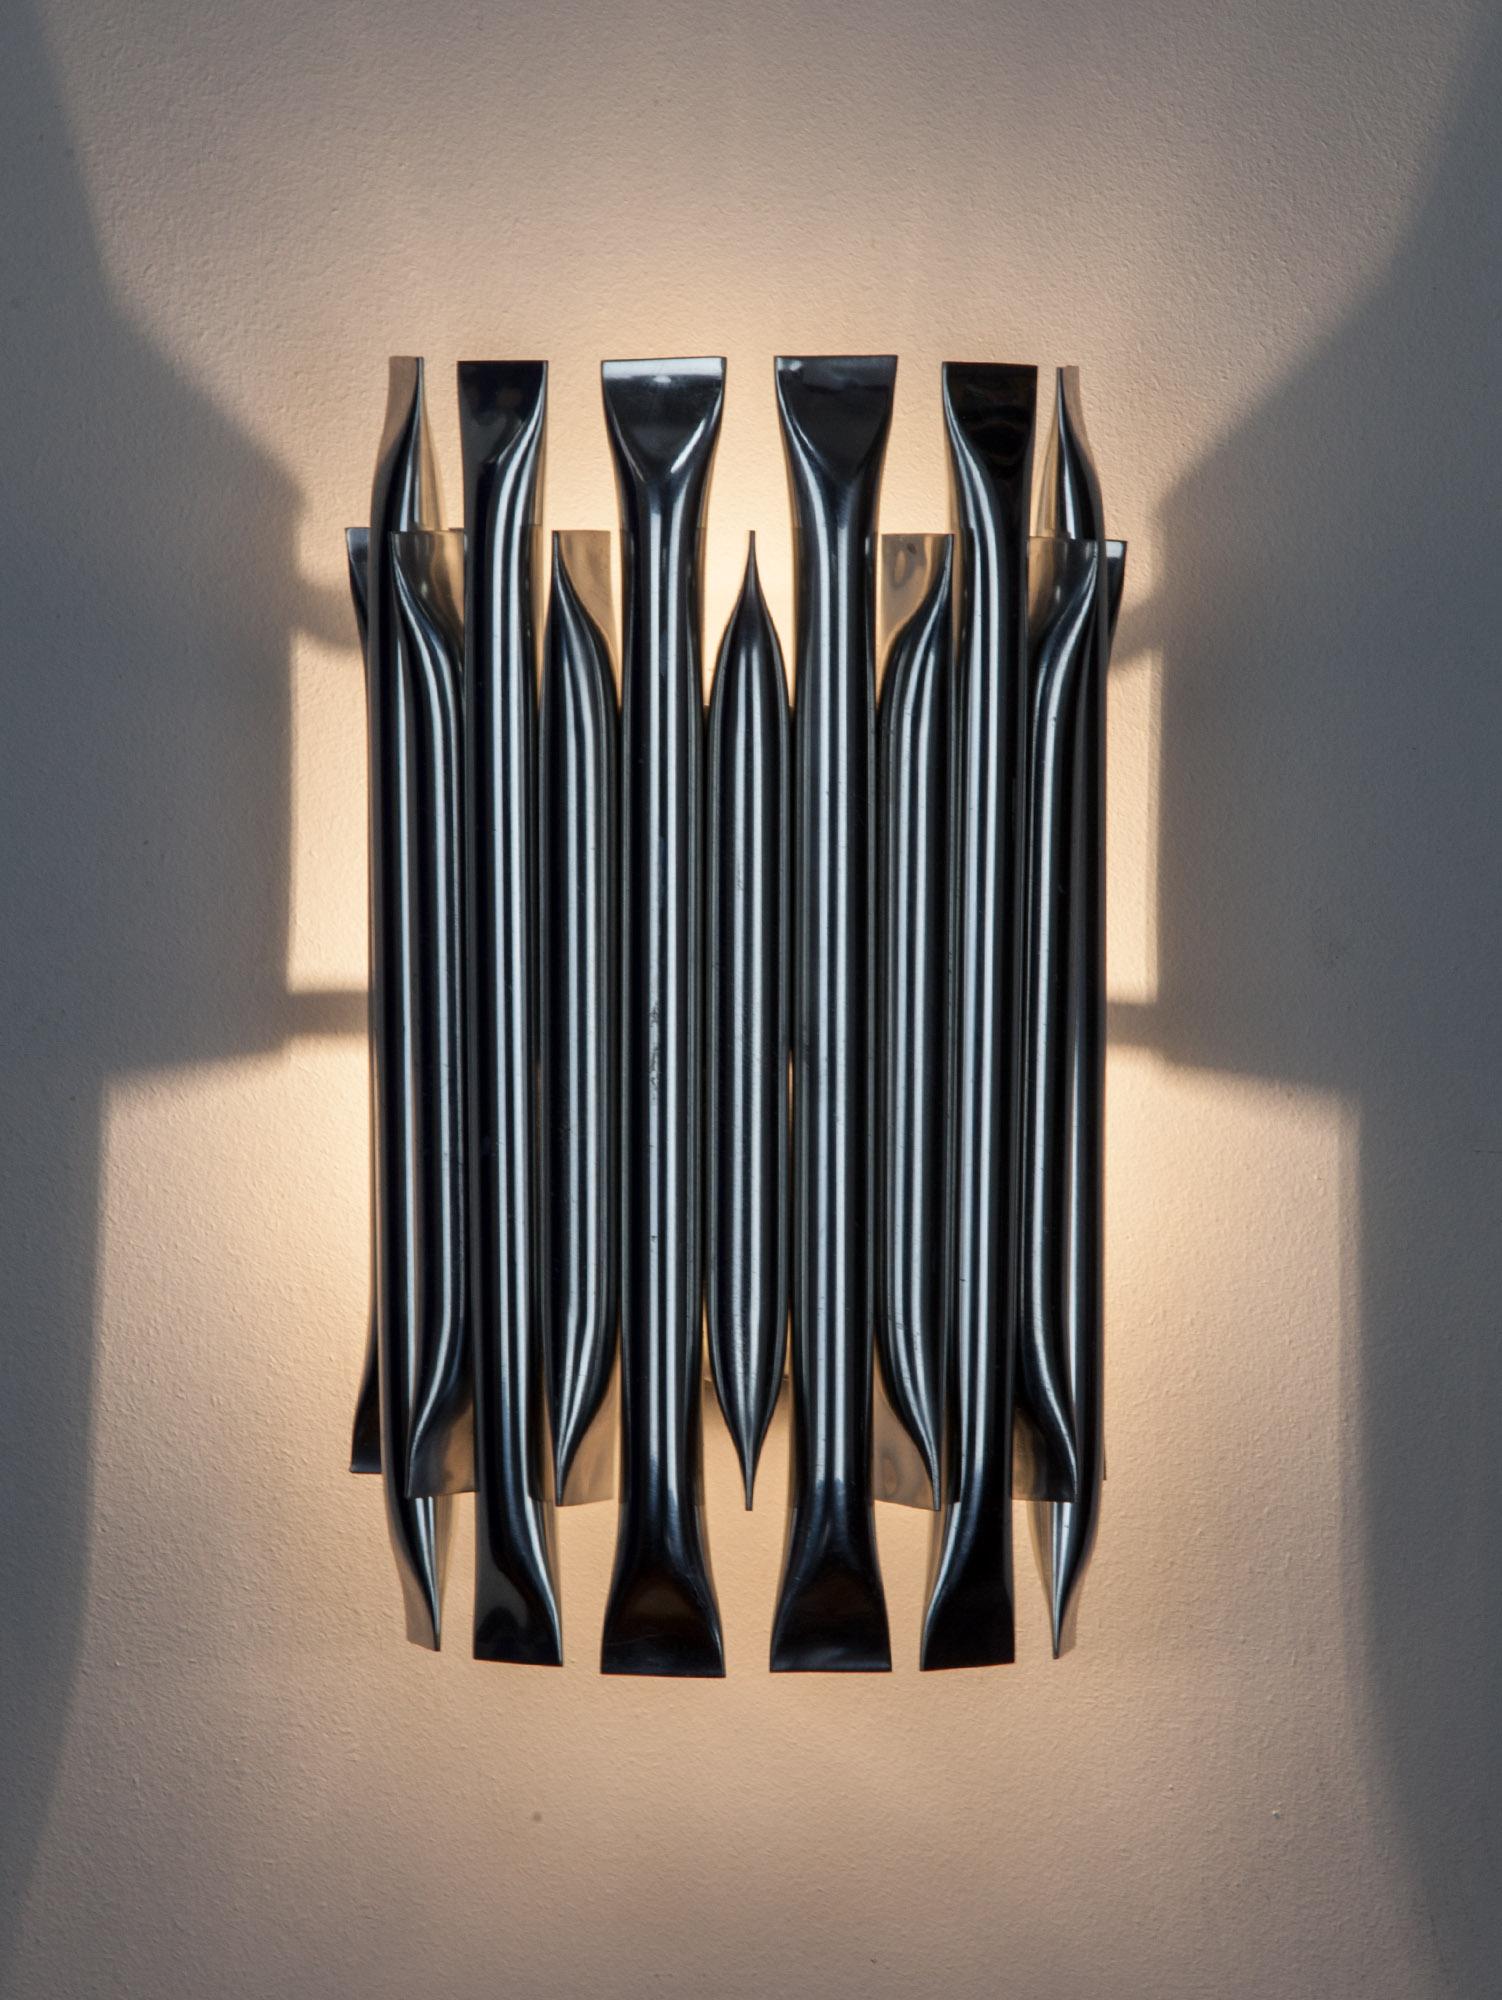 Striking wall light by RAAK with a series of aluminium tubes, in alternating lengths, arranged in an arch. The Brutalist inspired design creates an impressive graphic with either the light on or off. Made in the Netherlands in the 1970s.

Great